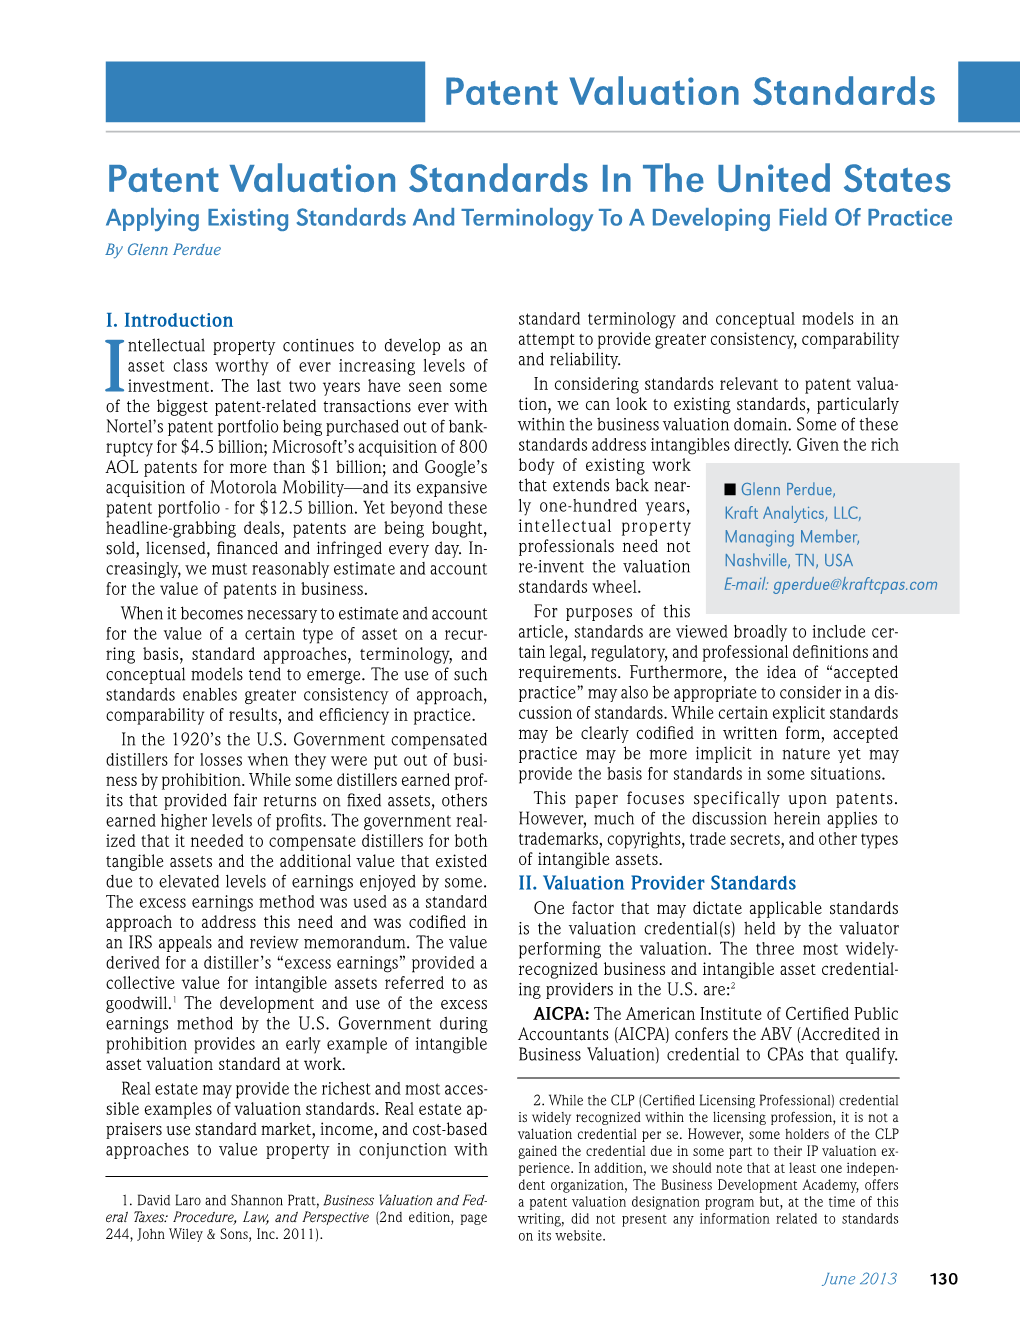 Patent Valuation Standards in the United States Applying Existing Standards and Terminology to a Developing Field of Practice by Glenn Perdue